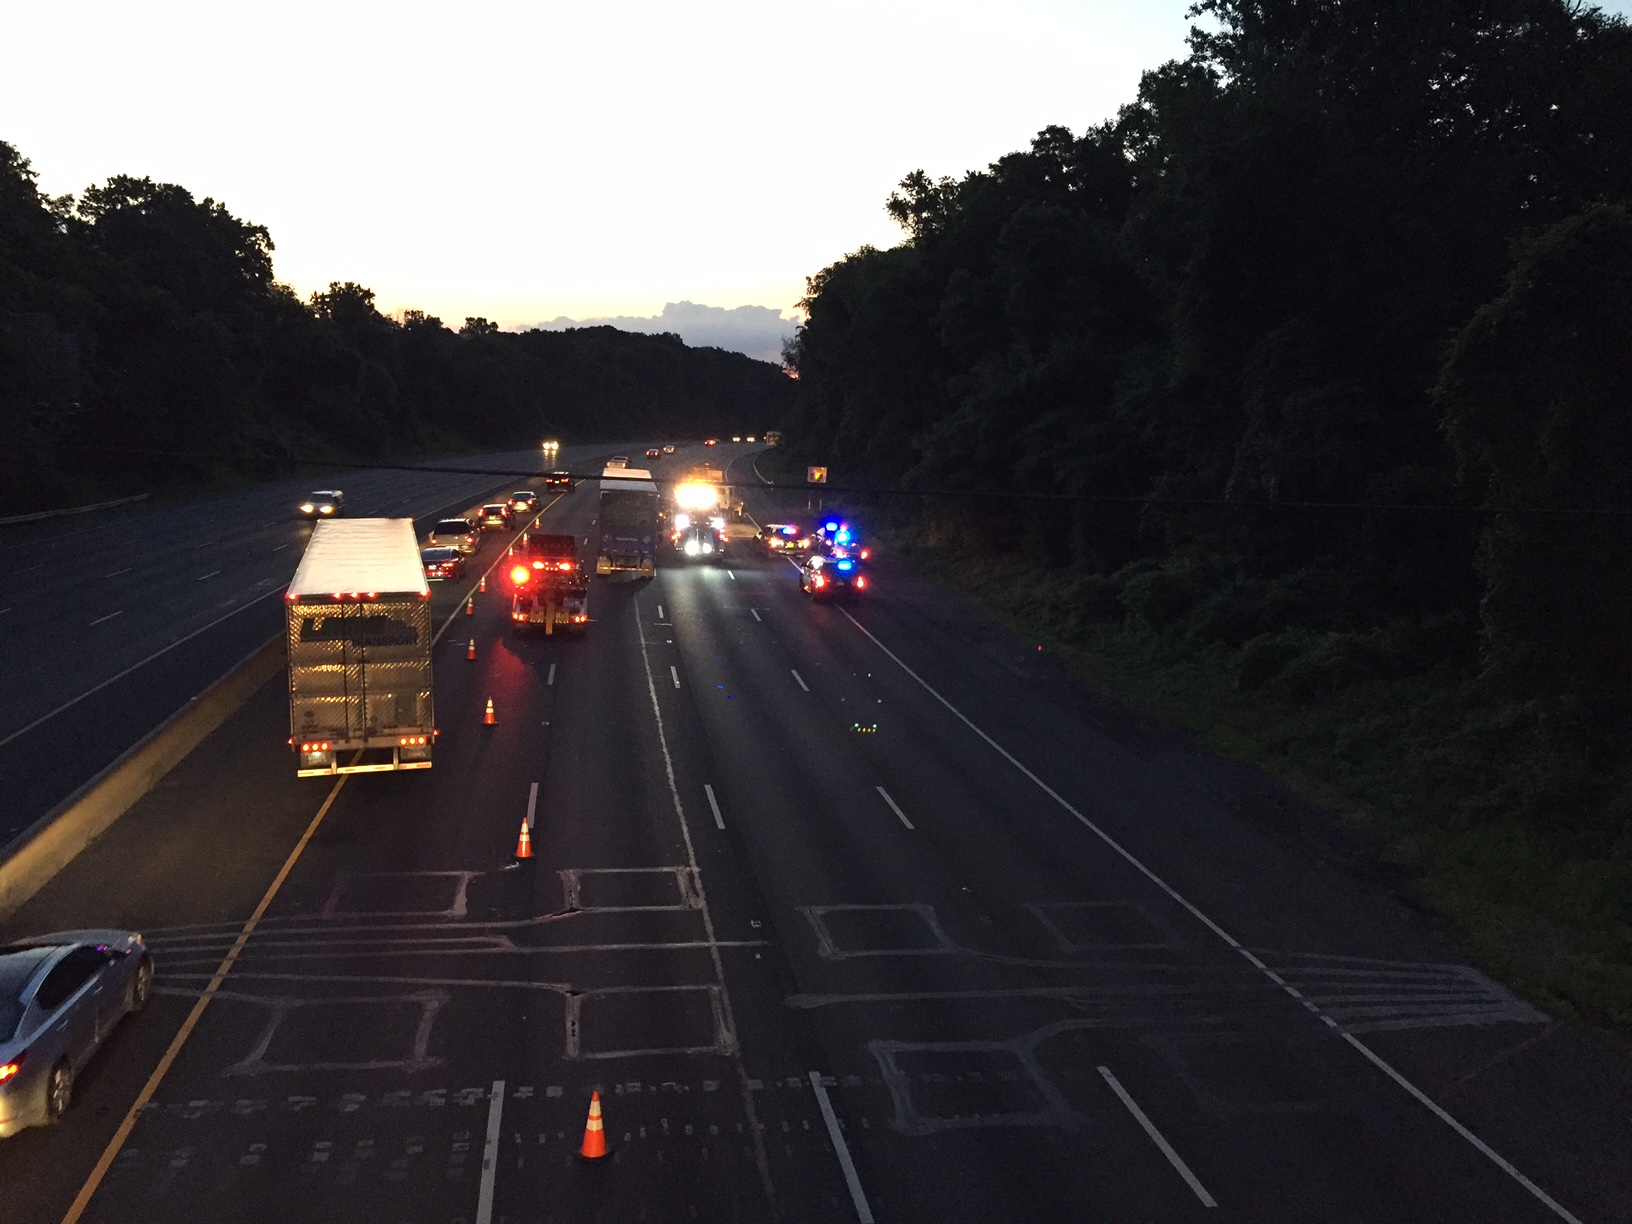 A woman has serious injuries when her car was struck by a truck on the Inner Loop of I-495 by Persimmon Tree Lane early Saturday, June 18. (Dennis Foley/WTOP)